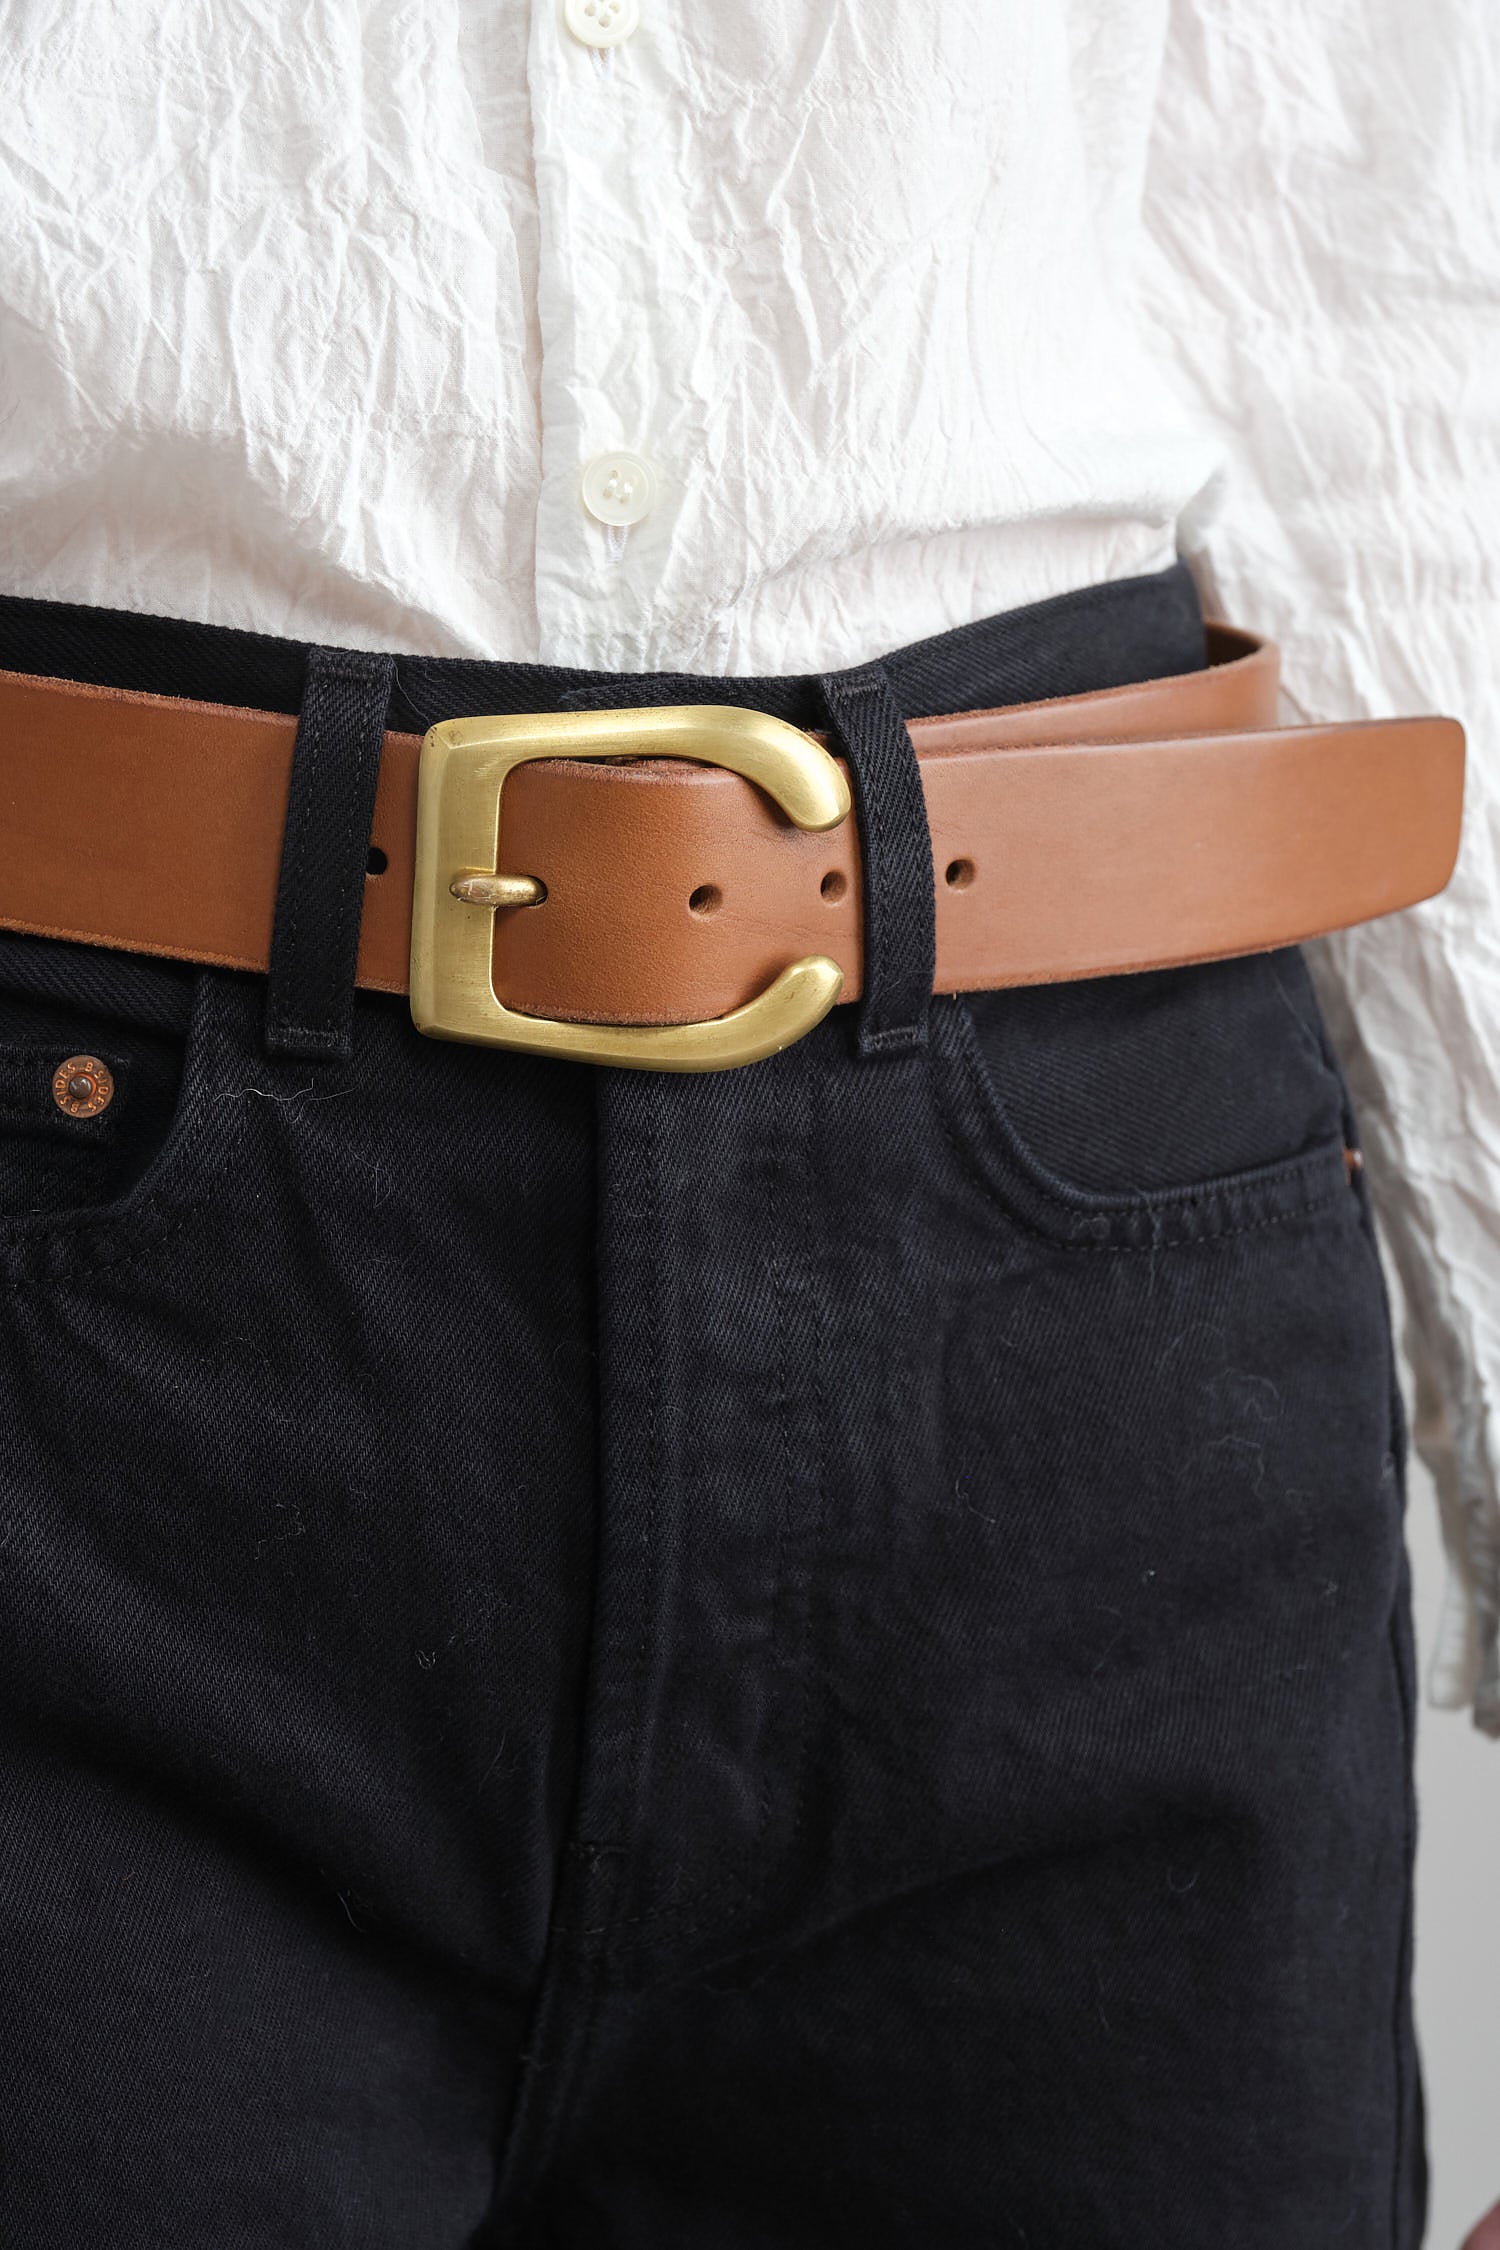 Close up of buckle on B5 Buckle Belt